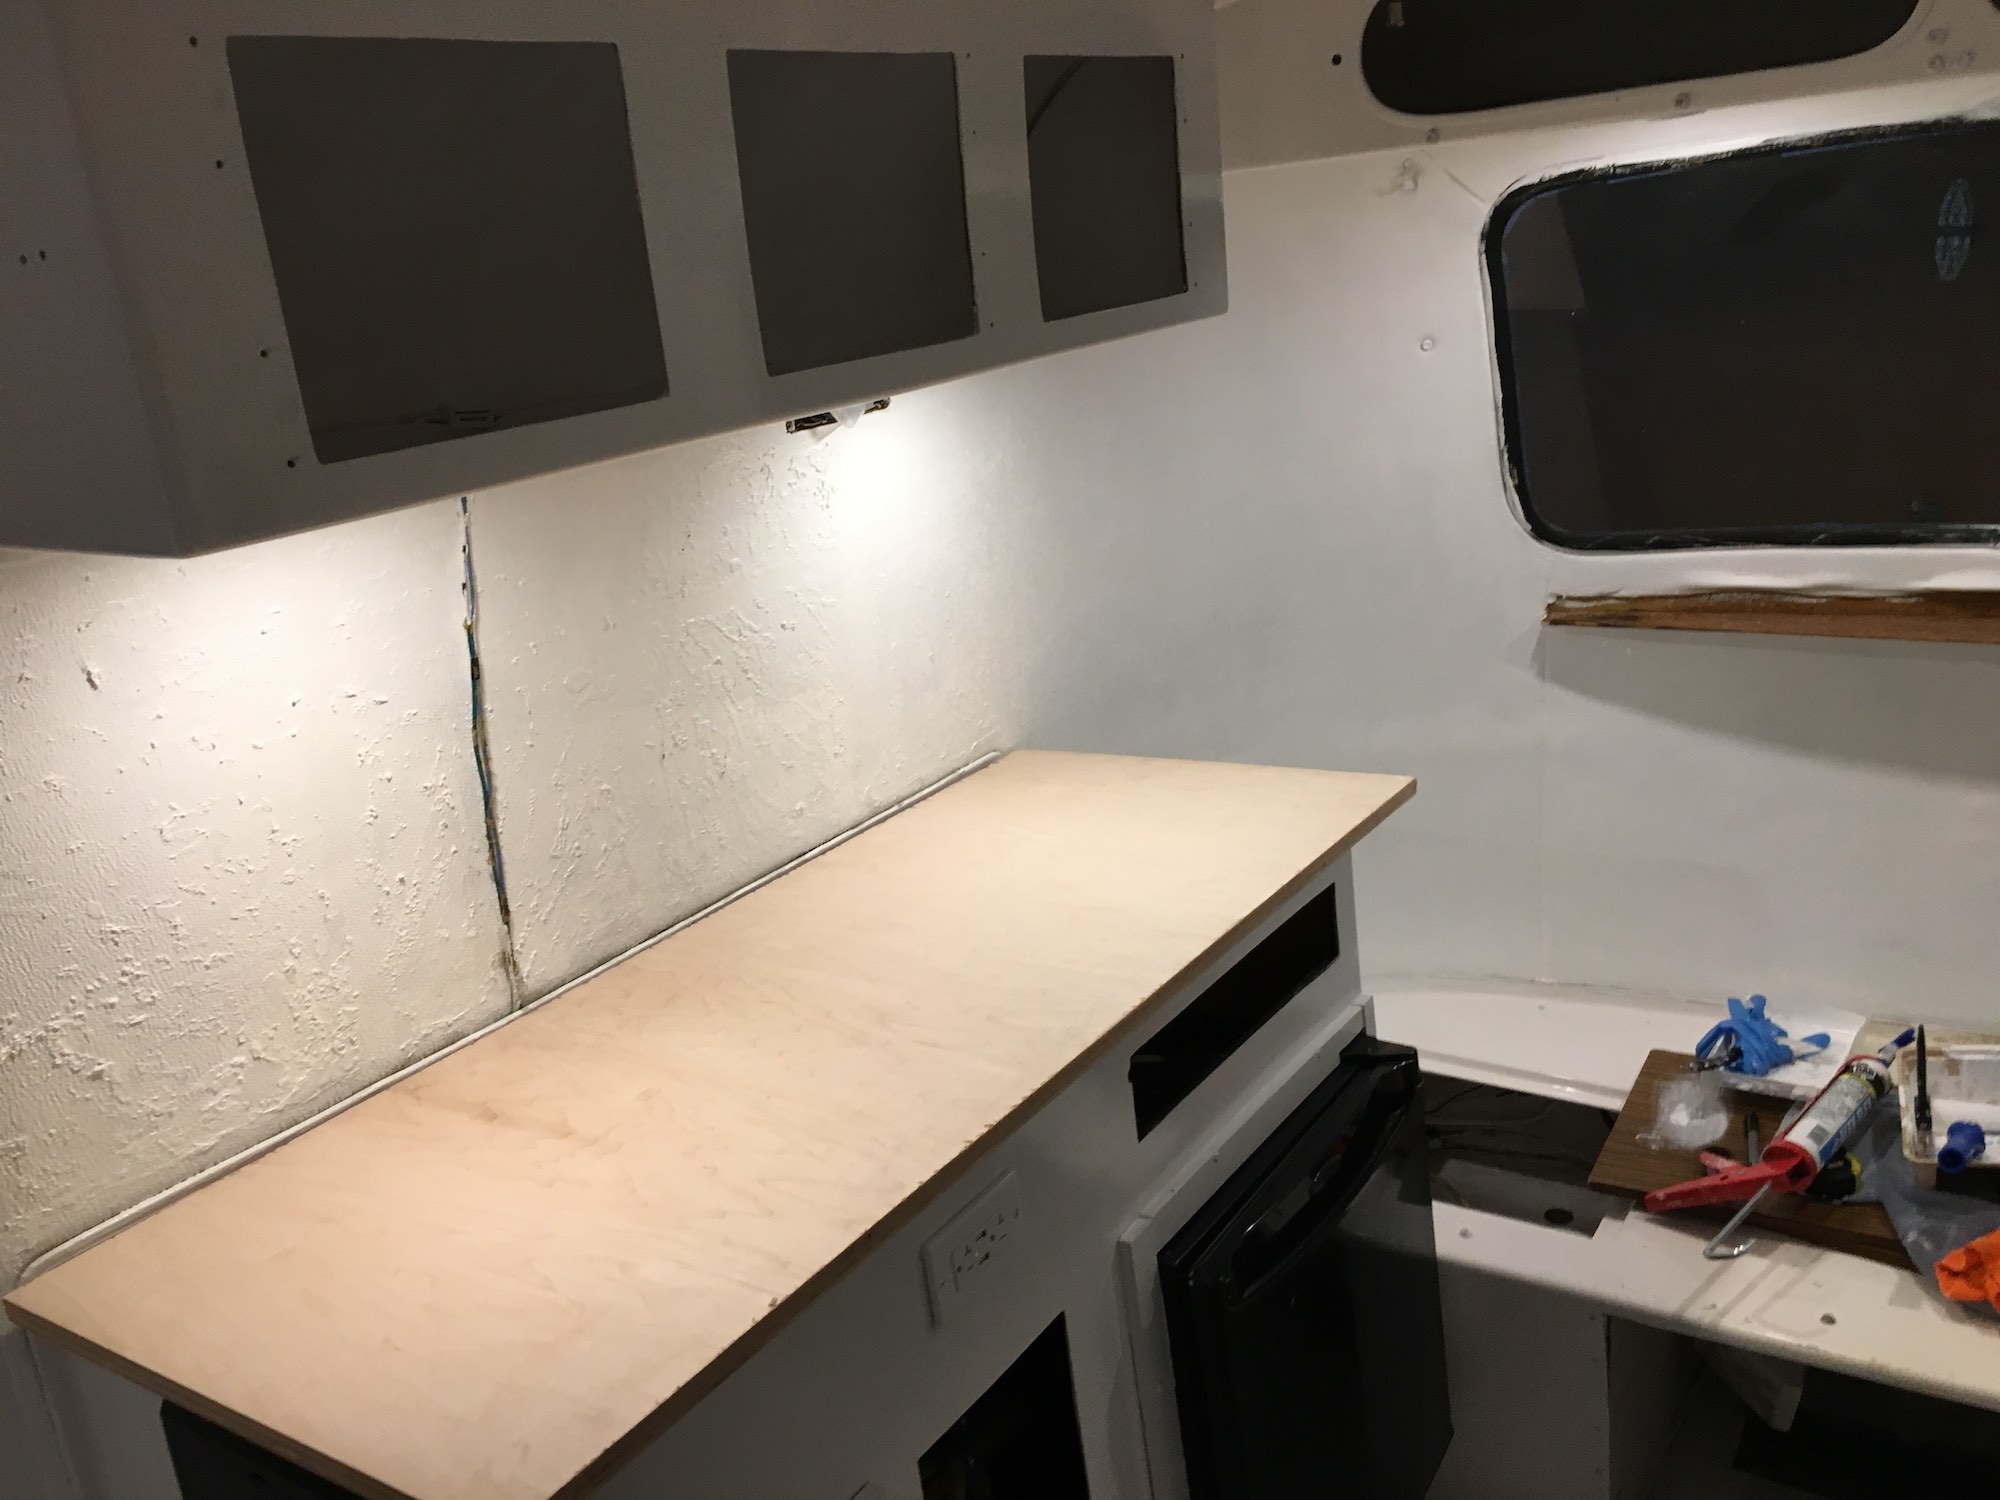 I also started test-fitting a new countertop I'd make from birch plywood.